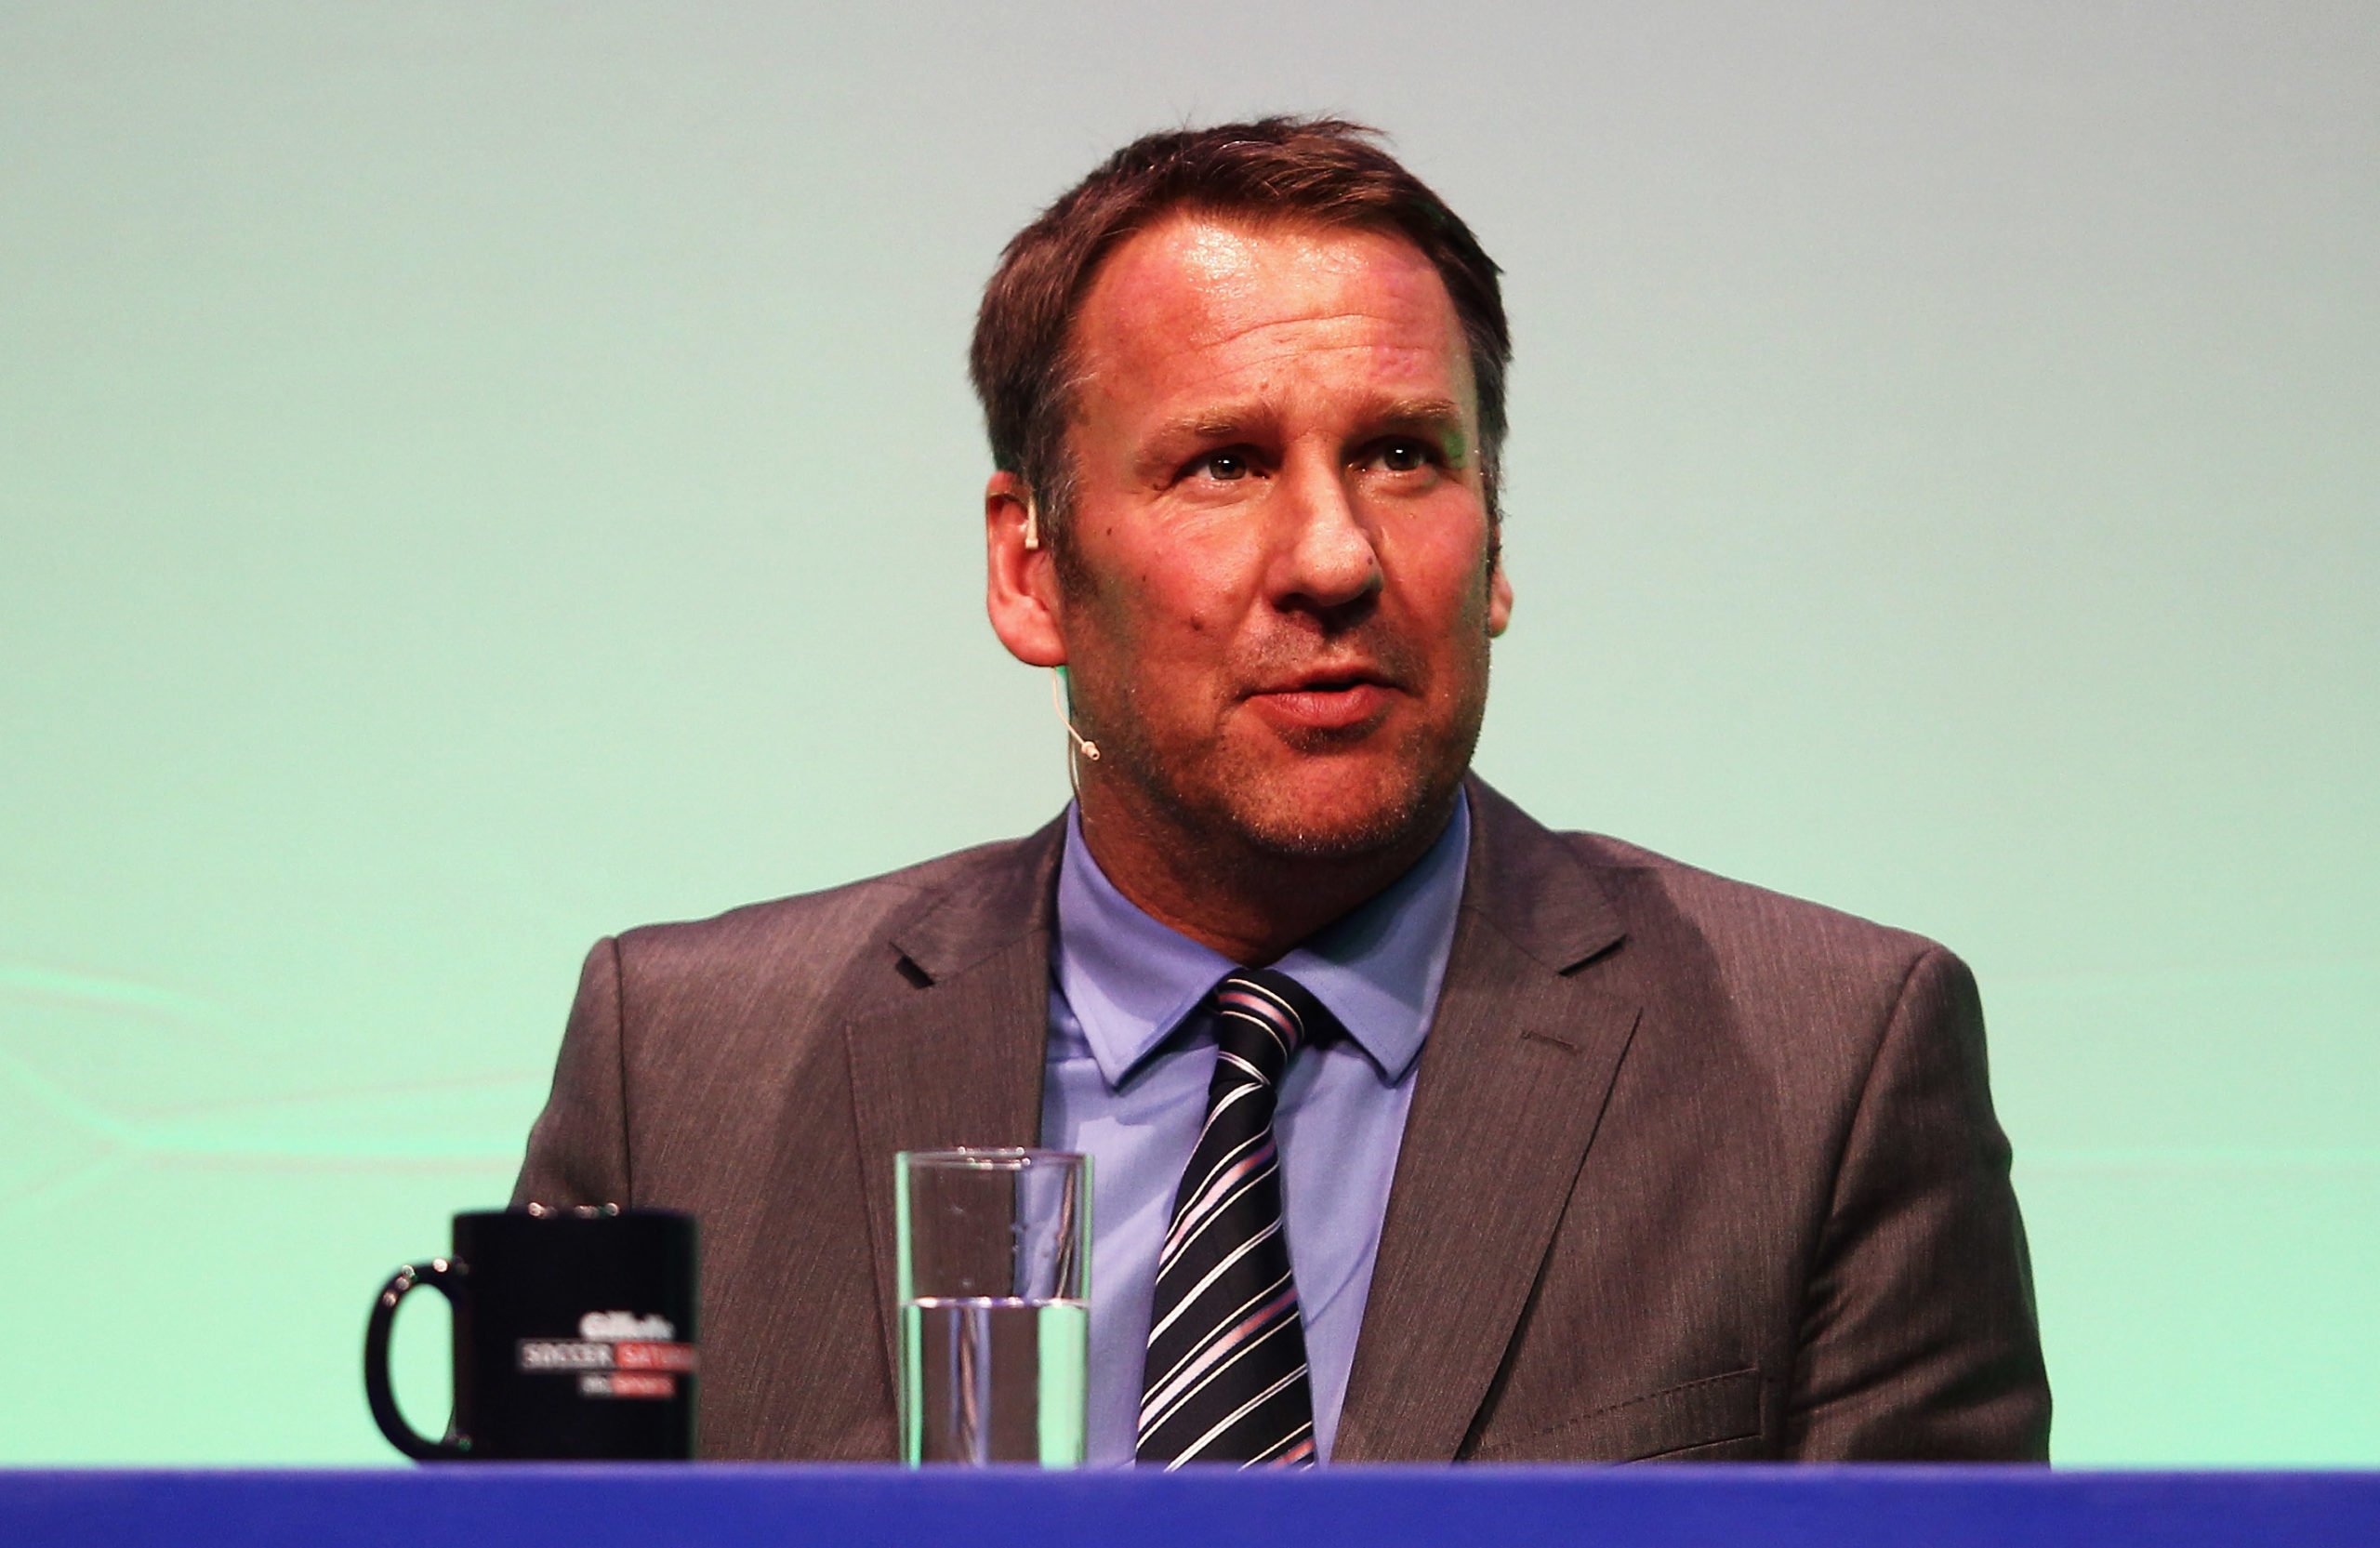 Paul Merson fires warning to West Ham and has some advice for David Moyes